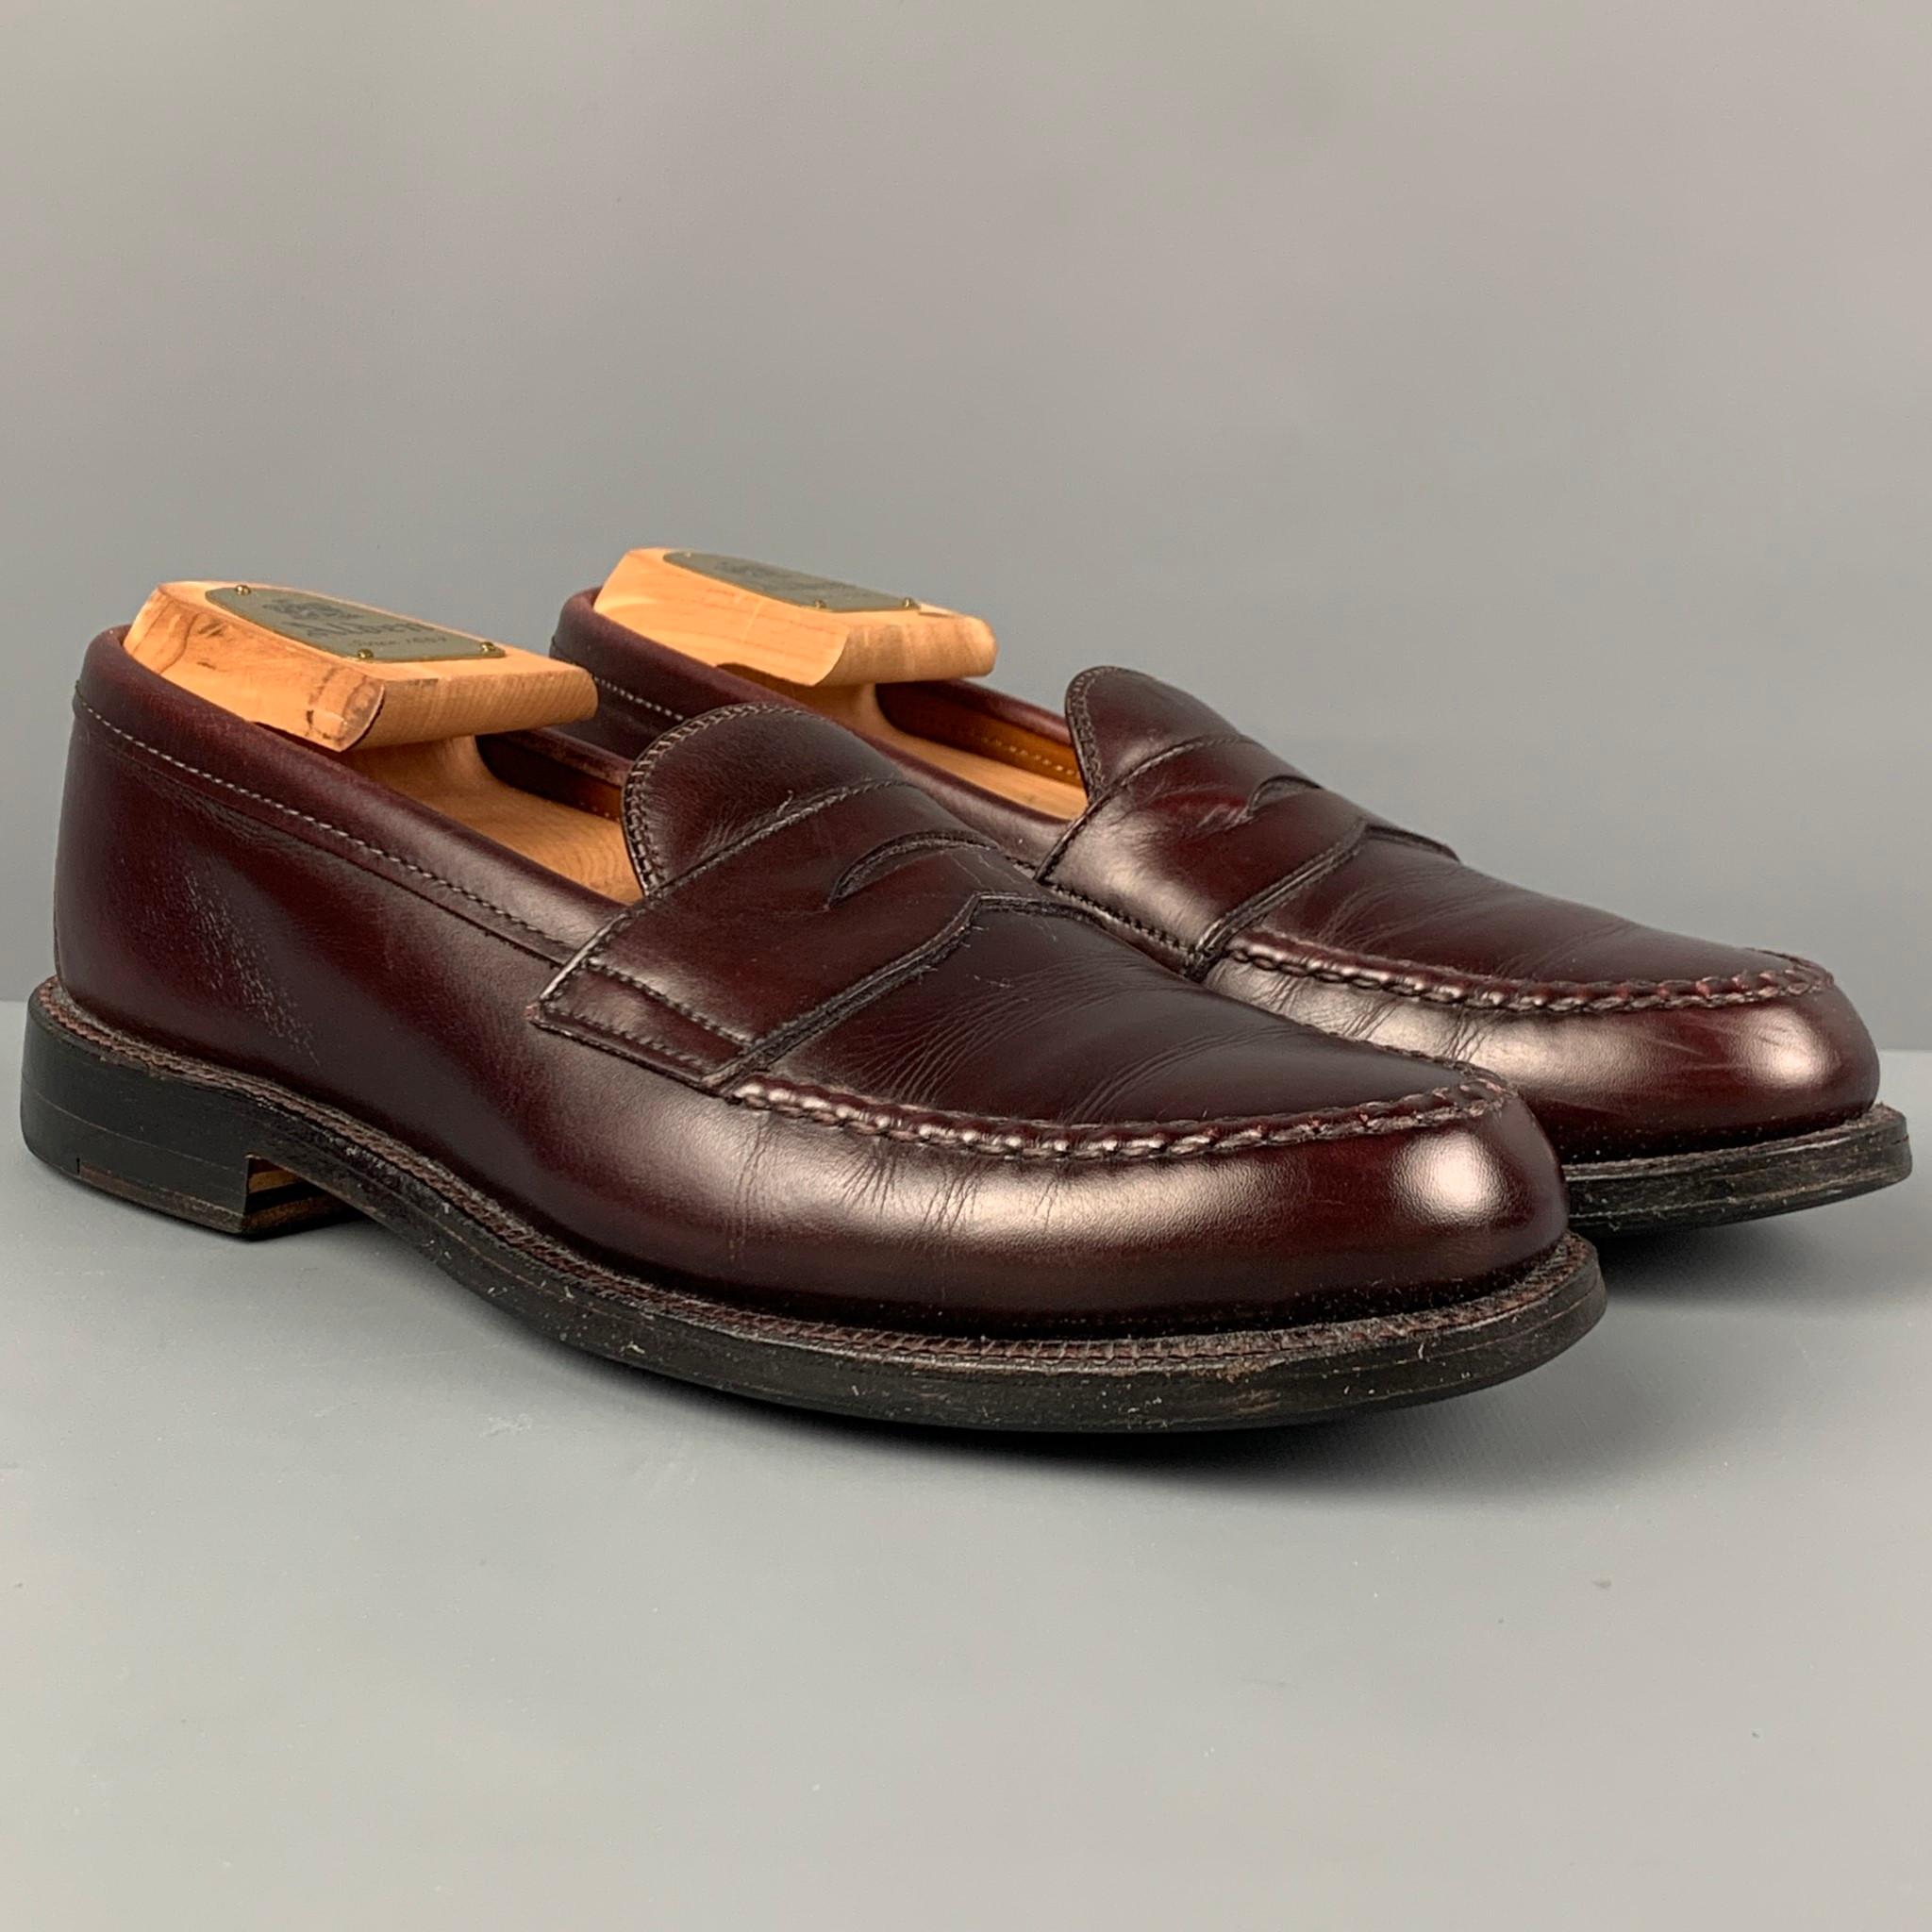 ALDEN Size 6.5 Burgundy Leather Penny Loafers 2